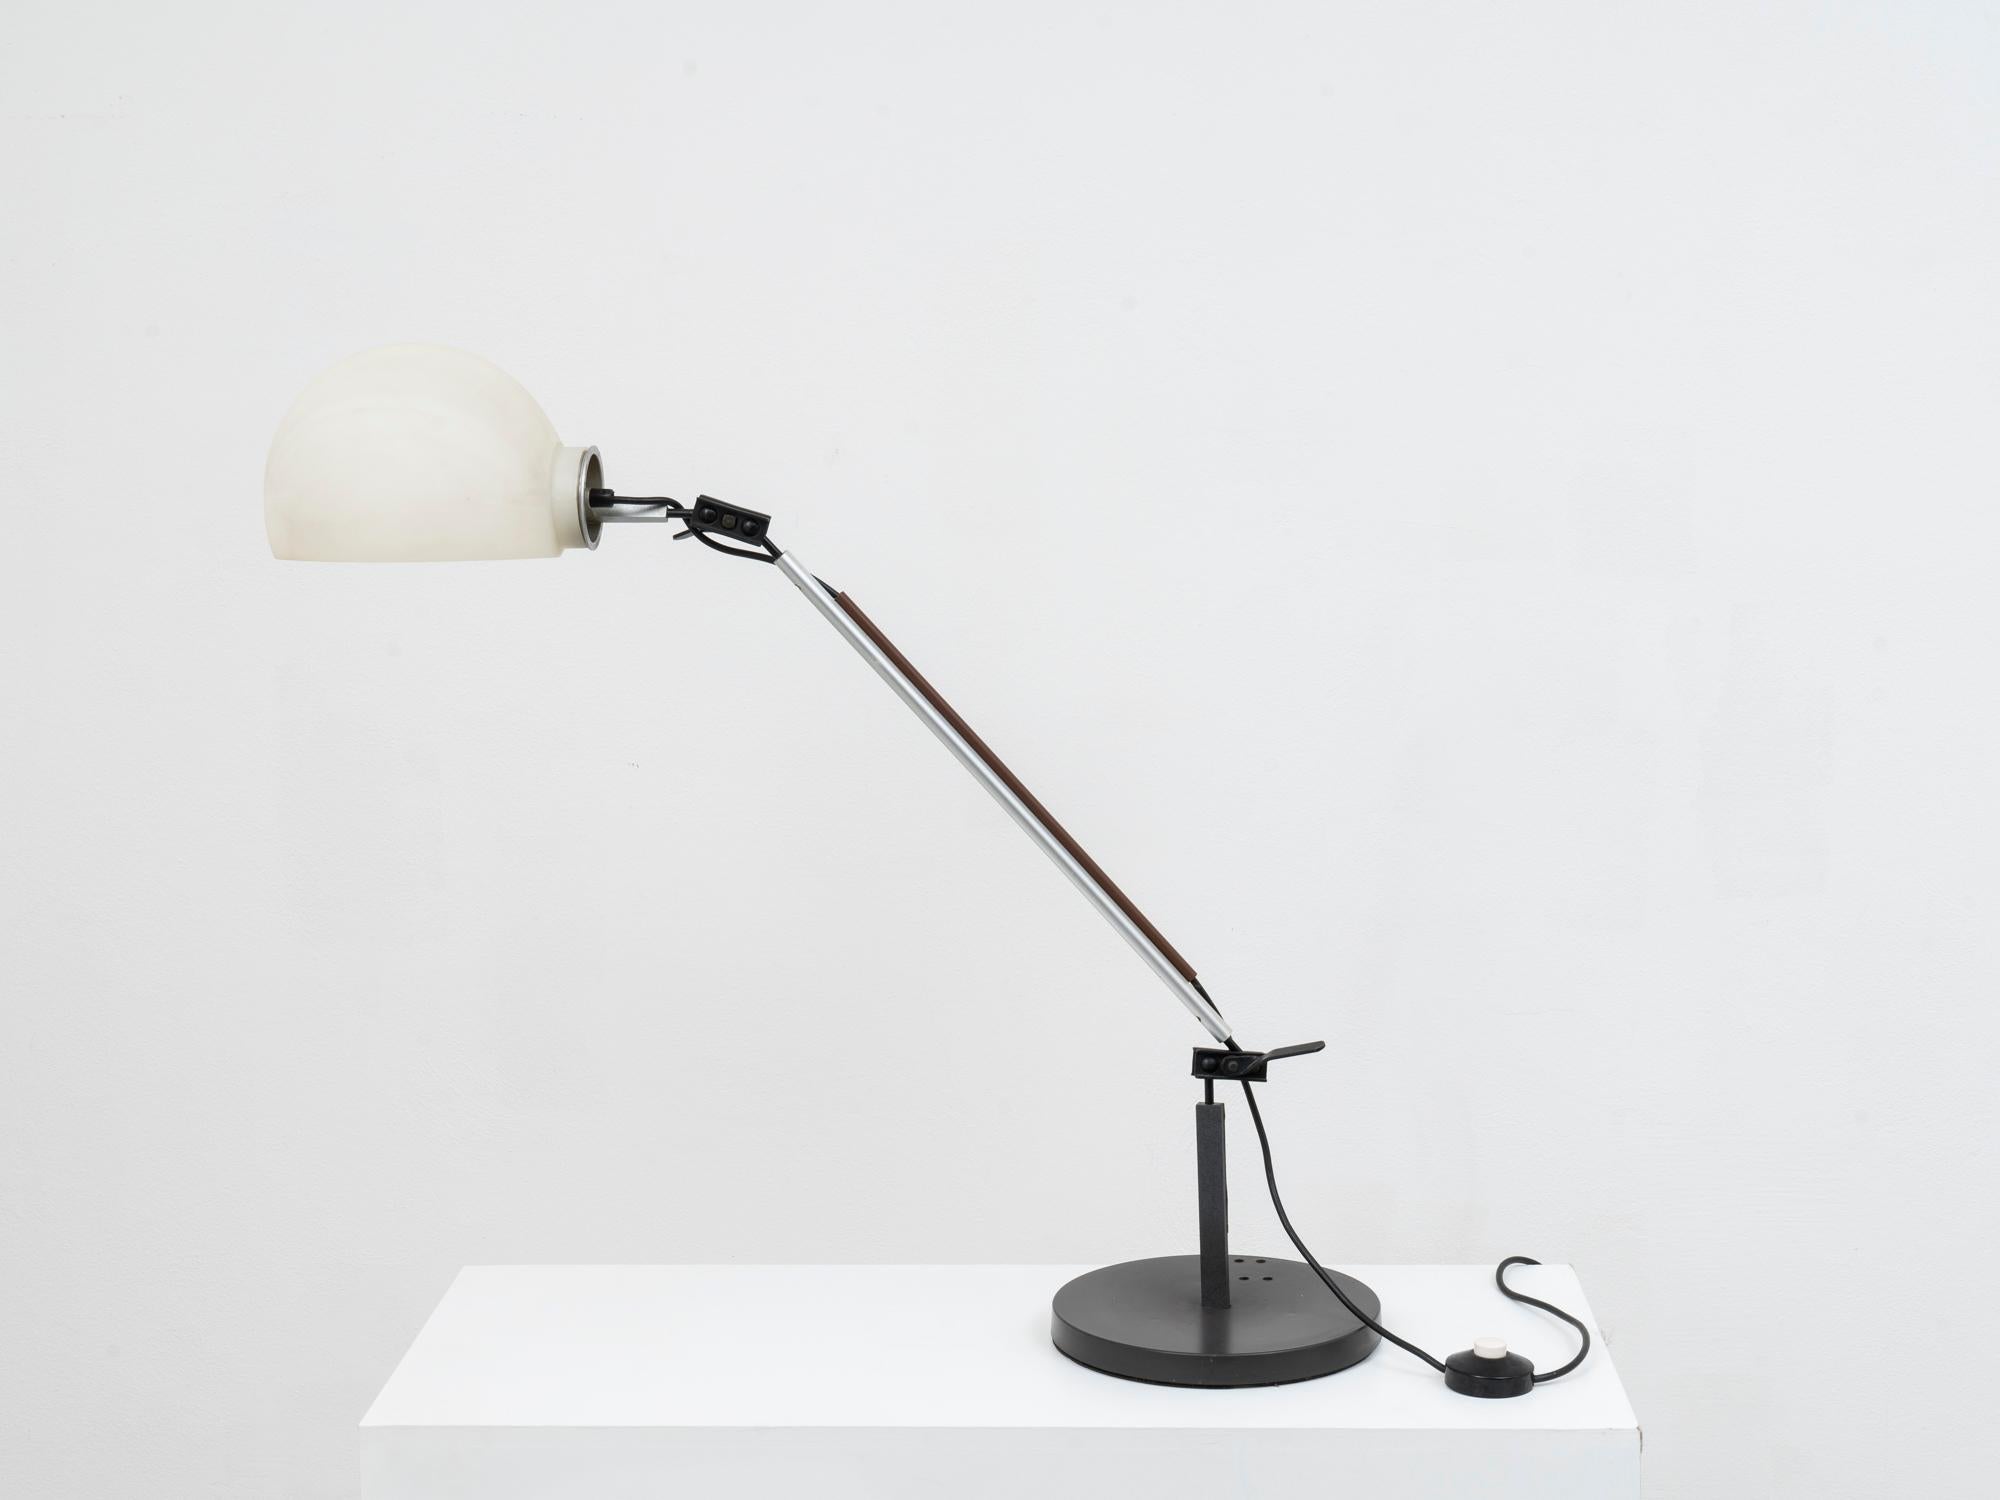 This desk lamp was first issued by Artemide in 1976, as a part of the combinable system crated by the Italian designers Enzo Mari and with Giancarlo Fassina. This system was composed by modular elements that could be freely combined to create